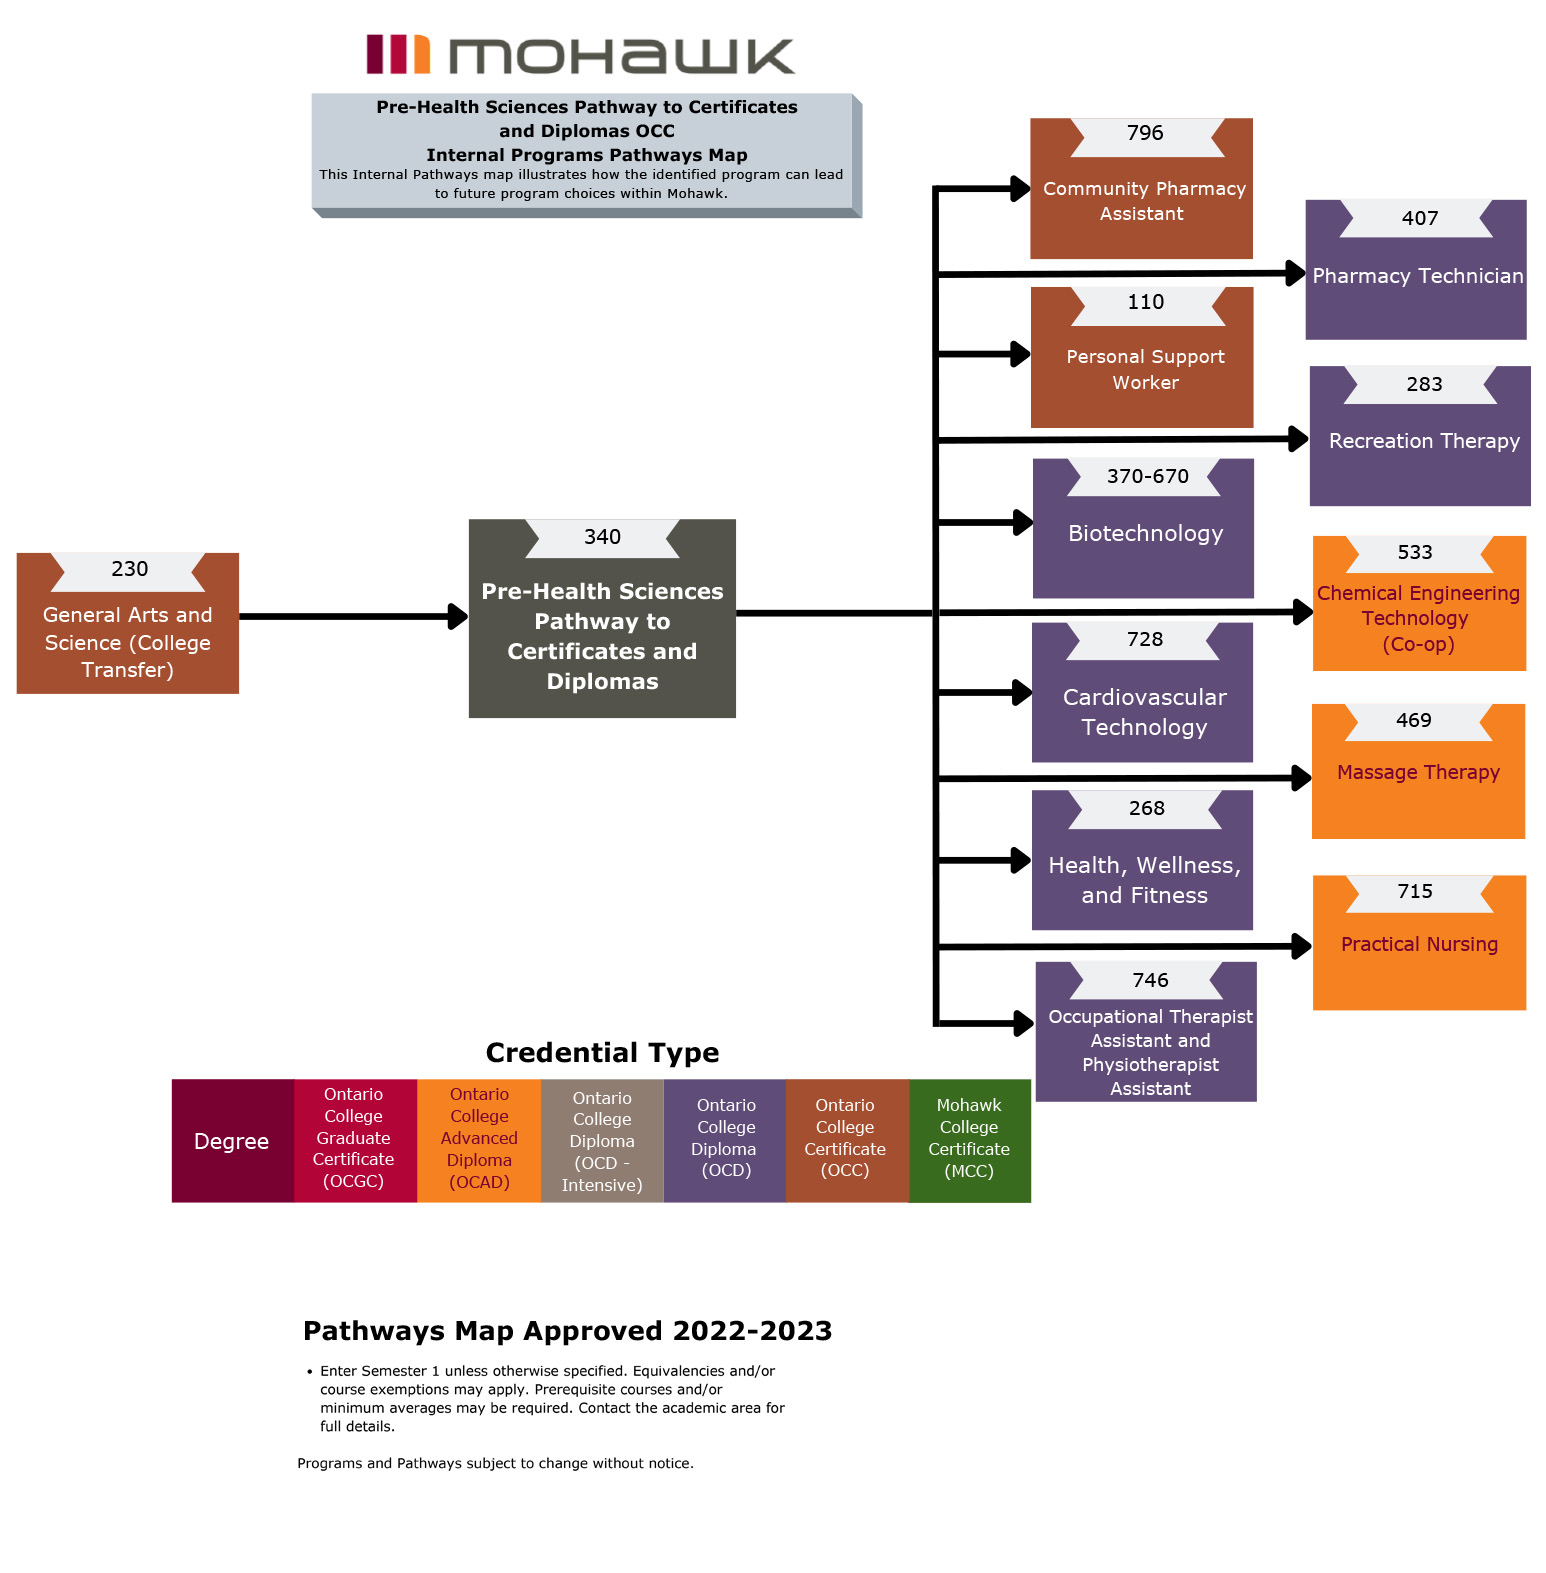 Pre-Health Sciences Pathway to Certificates and Diplomas pathways map